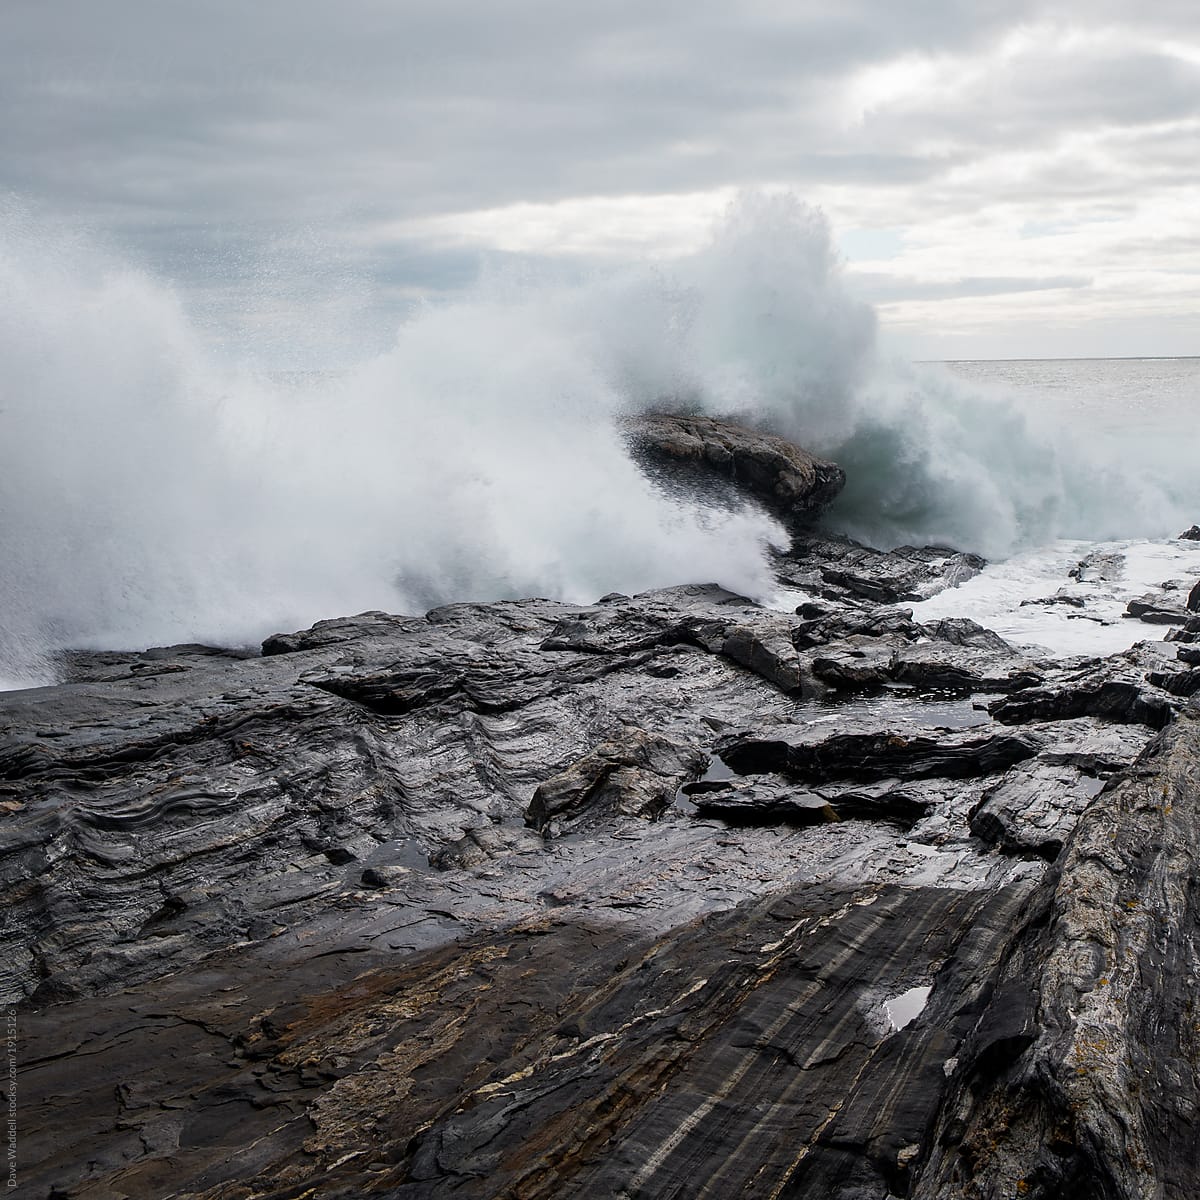 Giant waves crash into the rocky Maine coast after a powerful noreaster storm.